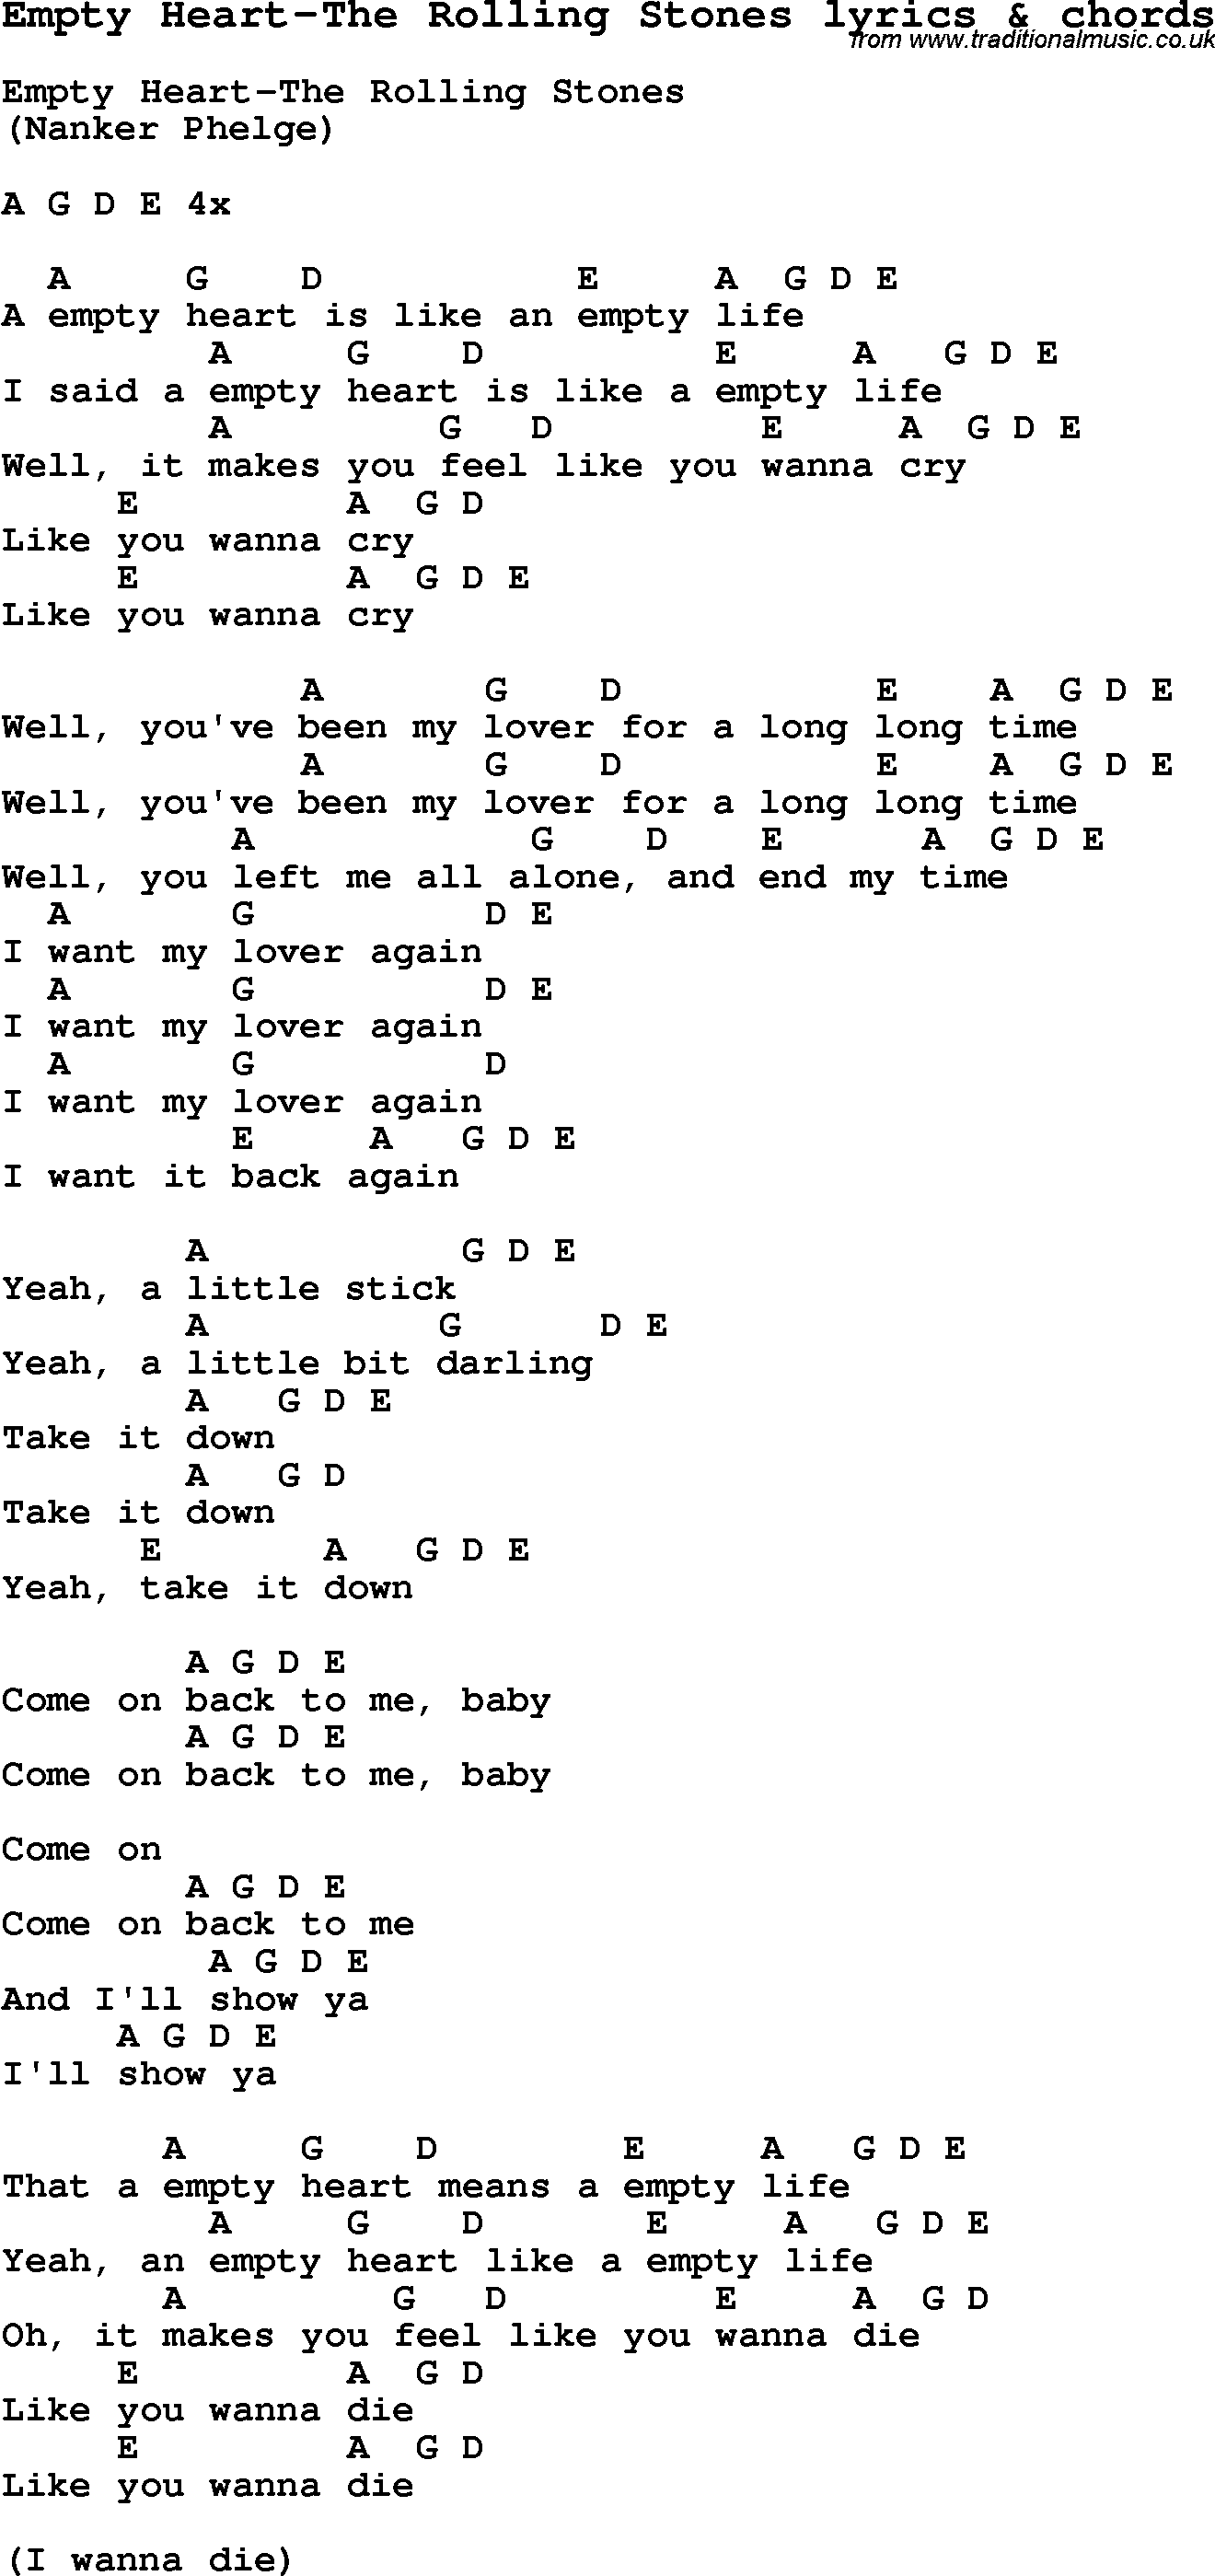 Love Song Lyrics for: Empty Heart-The Rolling Stones with chords for Ukulele, Guitar Banjo etc.